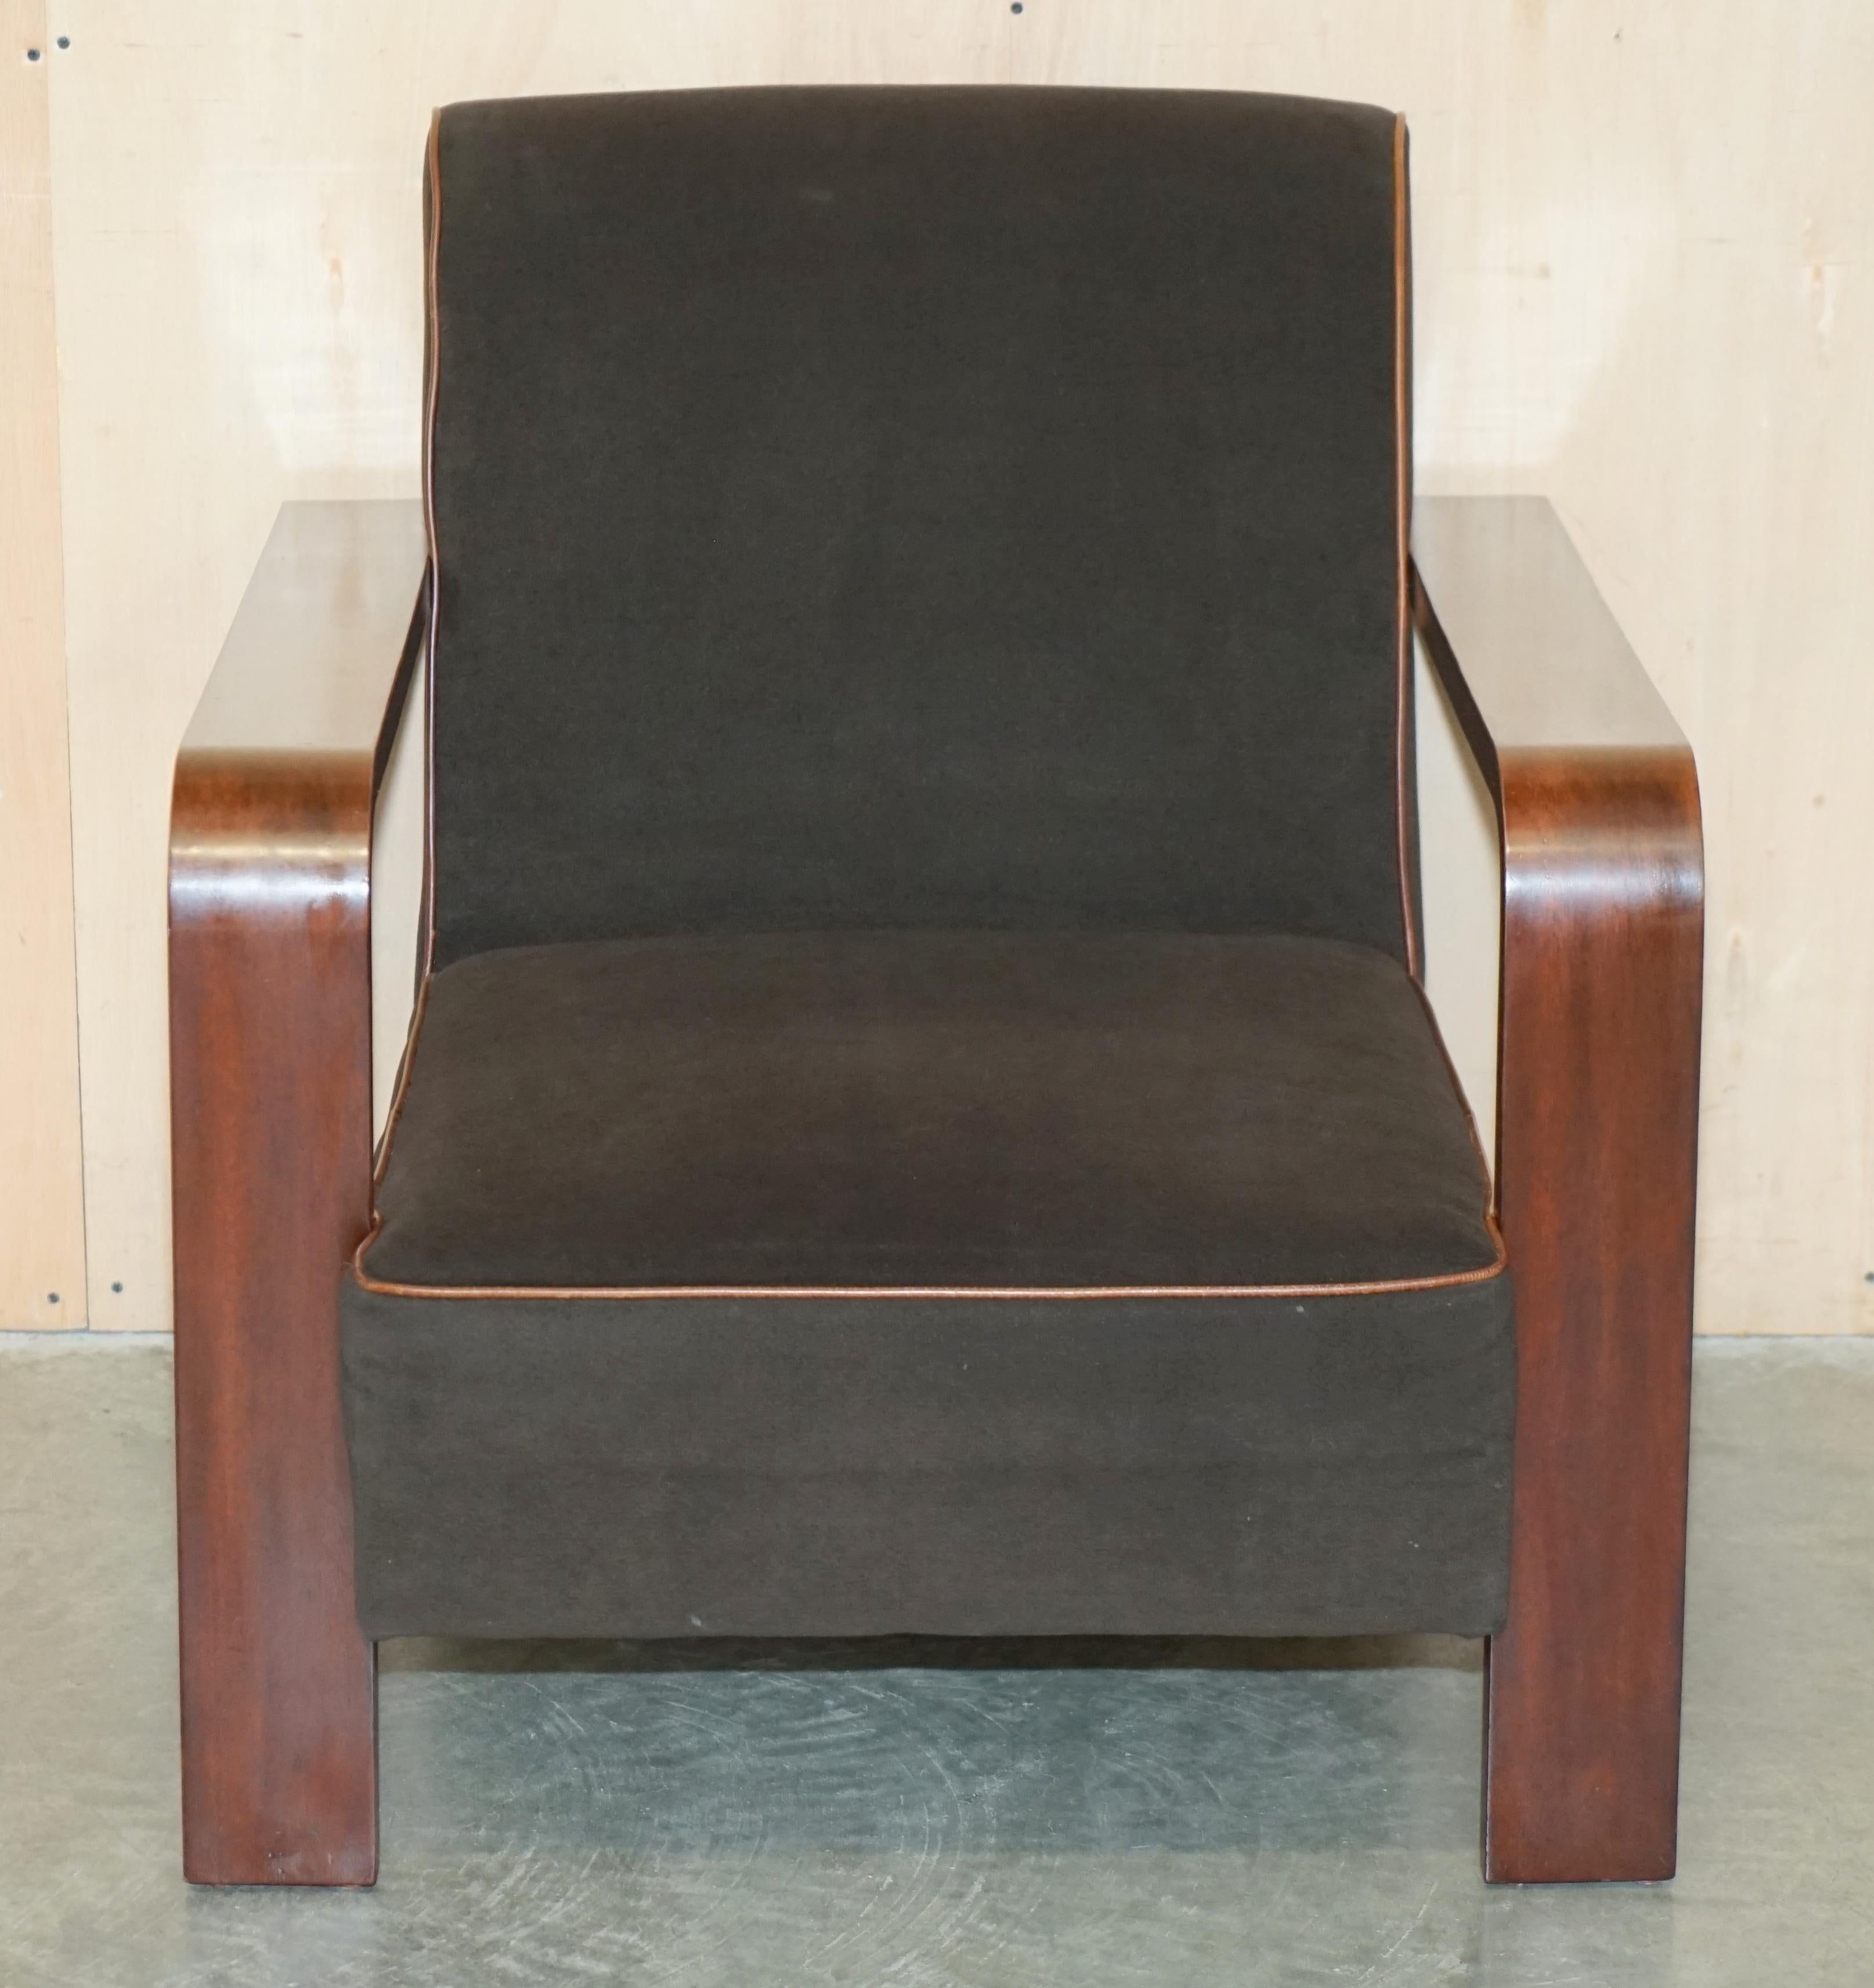 American PAIR OF RALPH LAUREN LOUNGE MODERNE HARDWOOD ARMCHAiRS MOHAIR LEATHEr For Sale